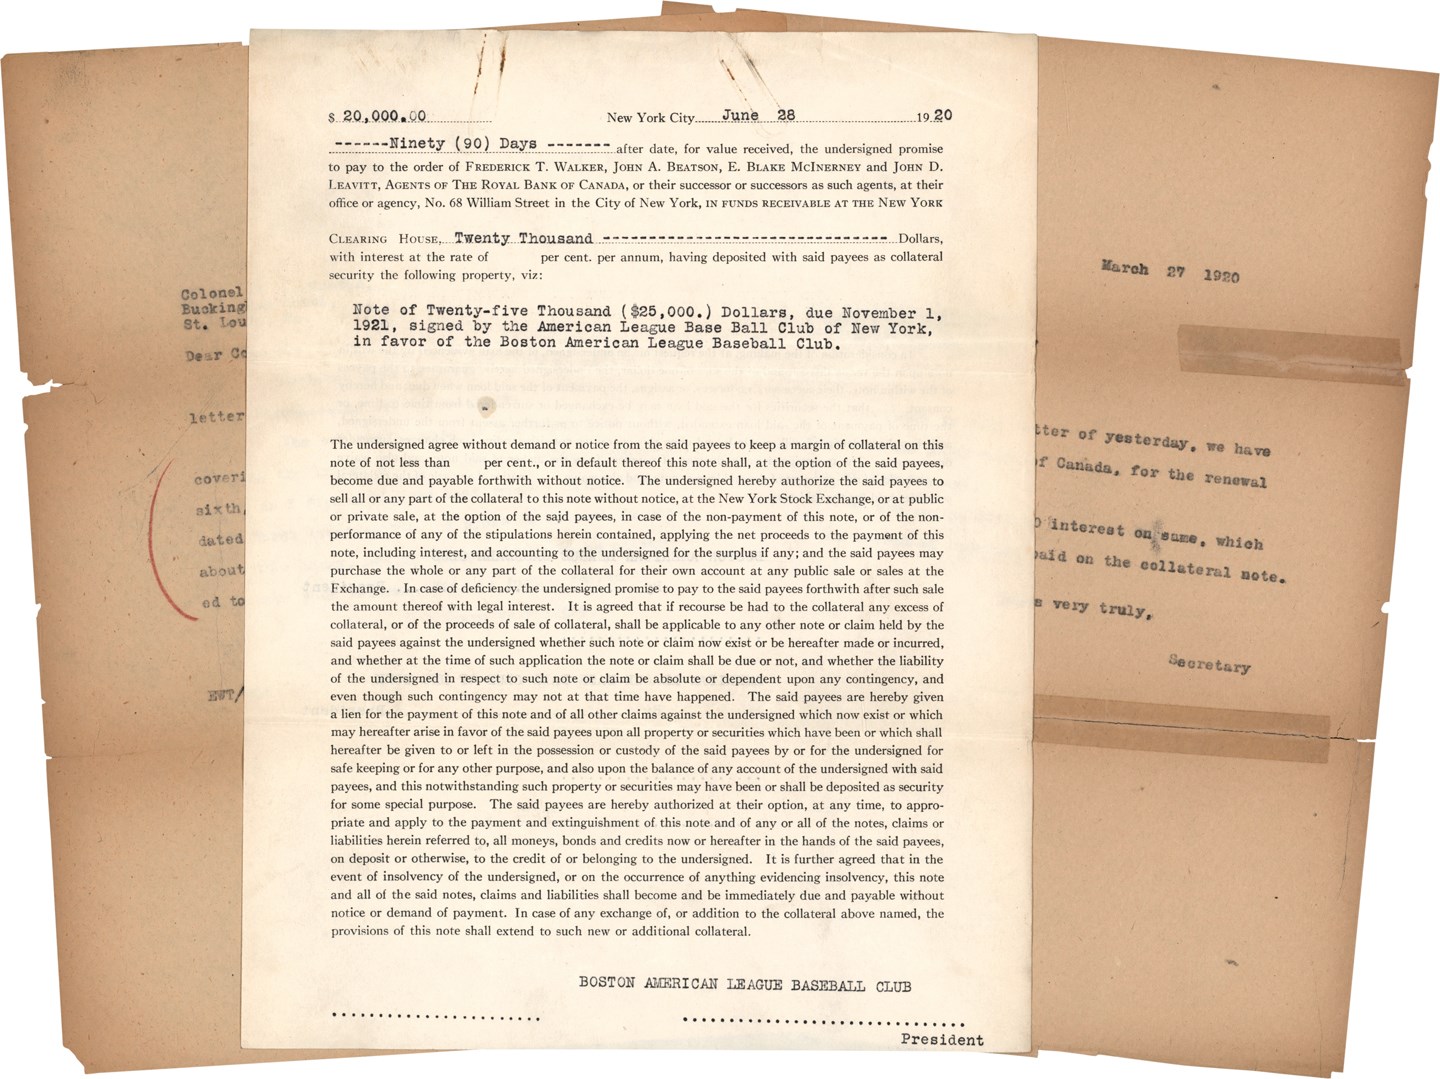 The Babe Ruth Sale Archive - Documents Pertaining to The Sale of Babe Ruth with Unexecuted 1920 Promissory Note (ex-Barry Halper Collection)